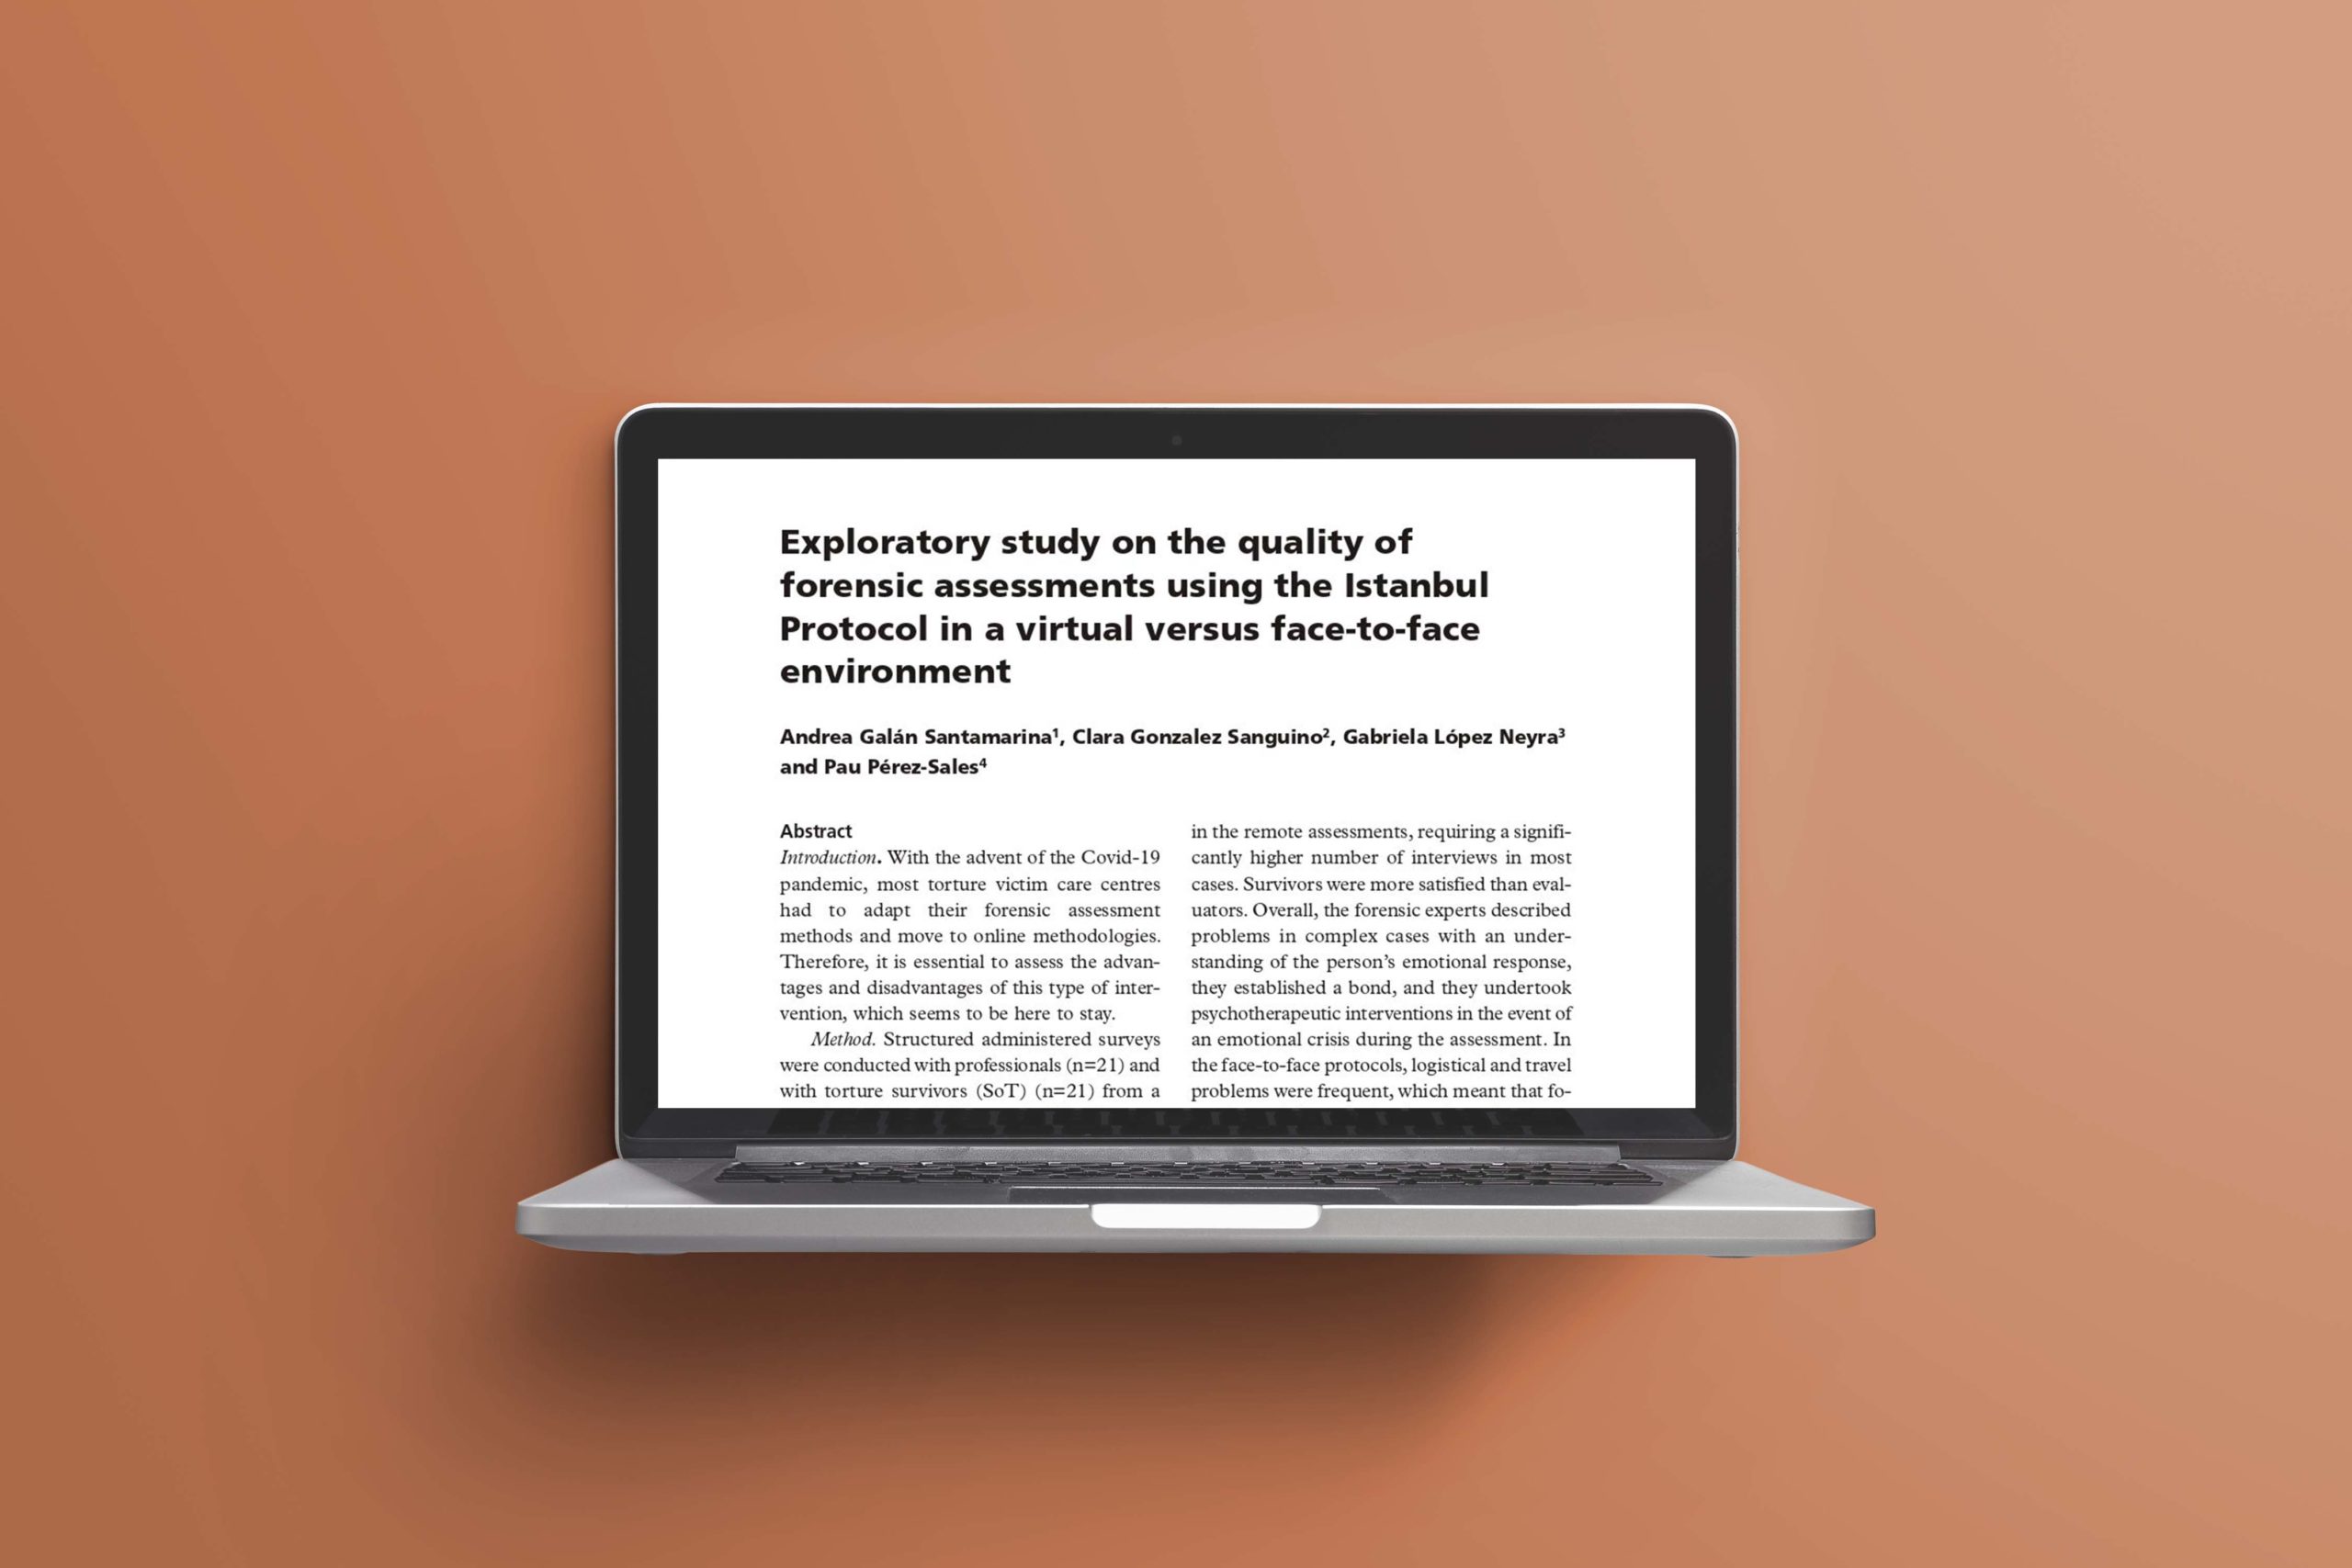 Exploratory study on the quality of forensic assessments using the Istanbul Protocol in a virtual versus face-to-face environment